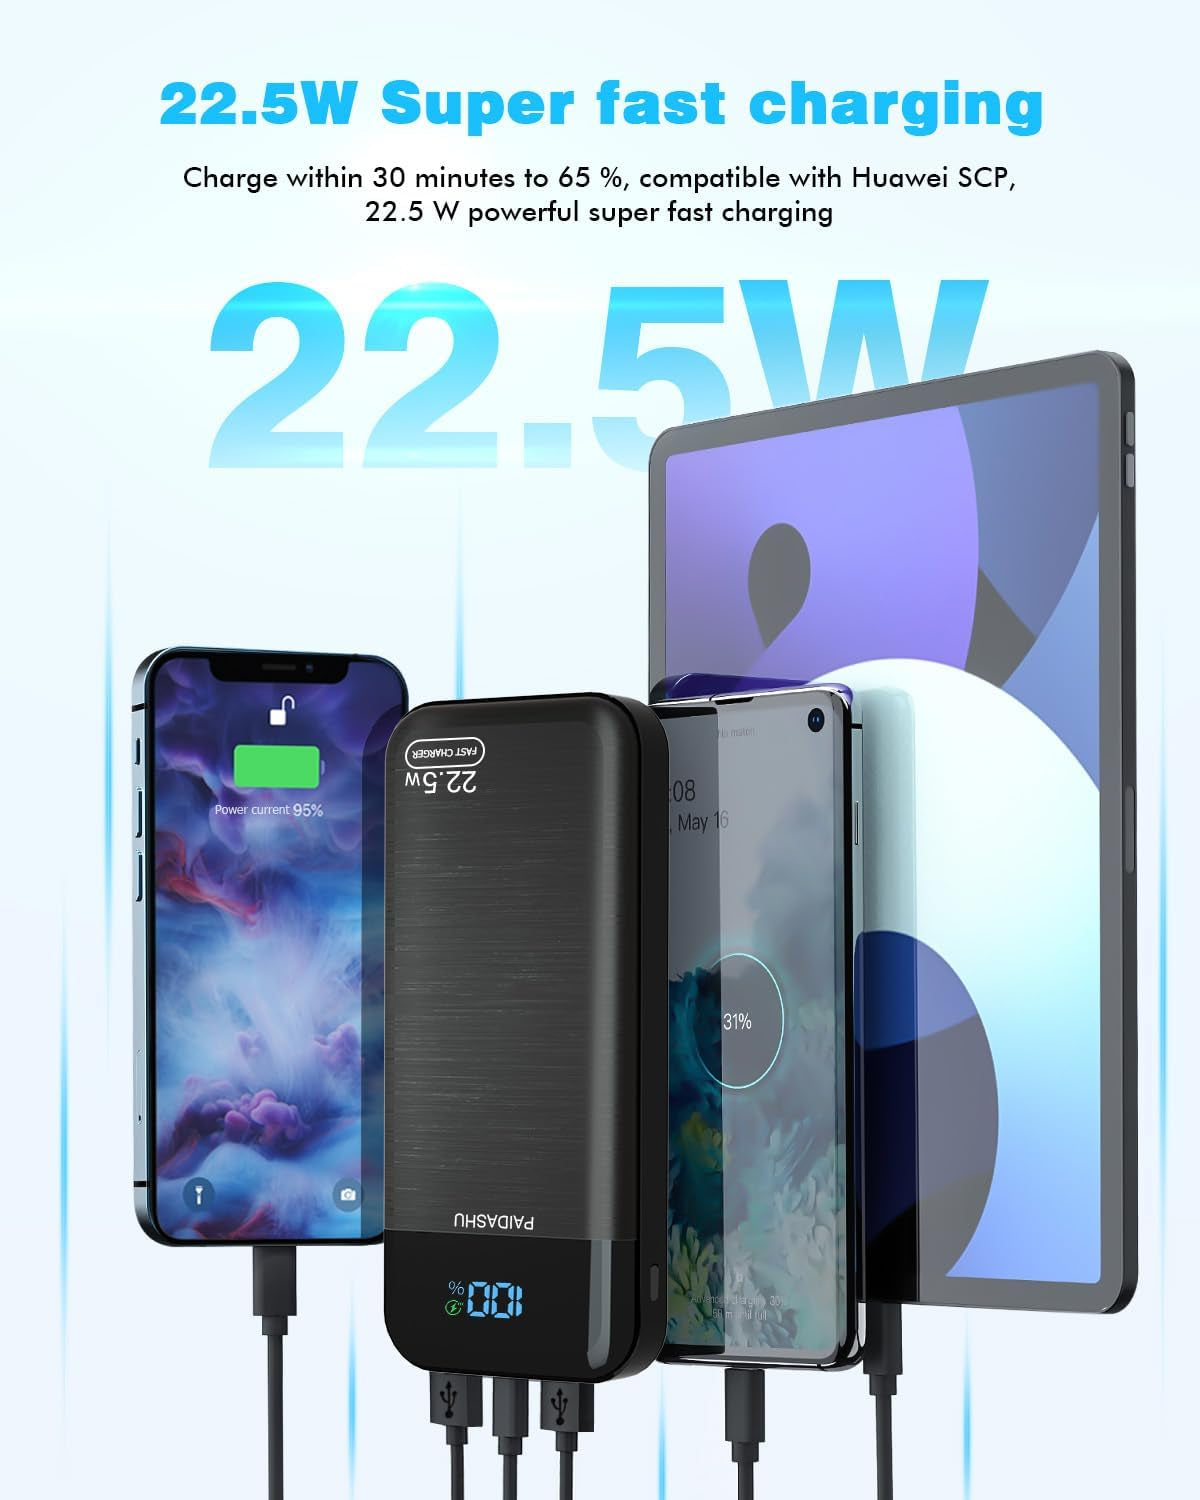 Power Bank 27,000Mah, PD3.0 QC4.0 22.5W Fast Charging PD20W USB C Powerbank Portable Charger with LCD Display 3 Outputs & 2 Inputs for Smartphones Tablets and More